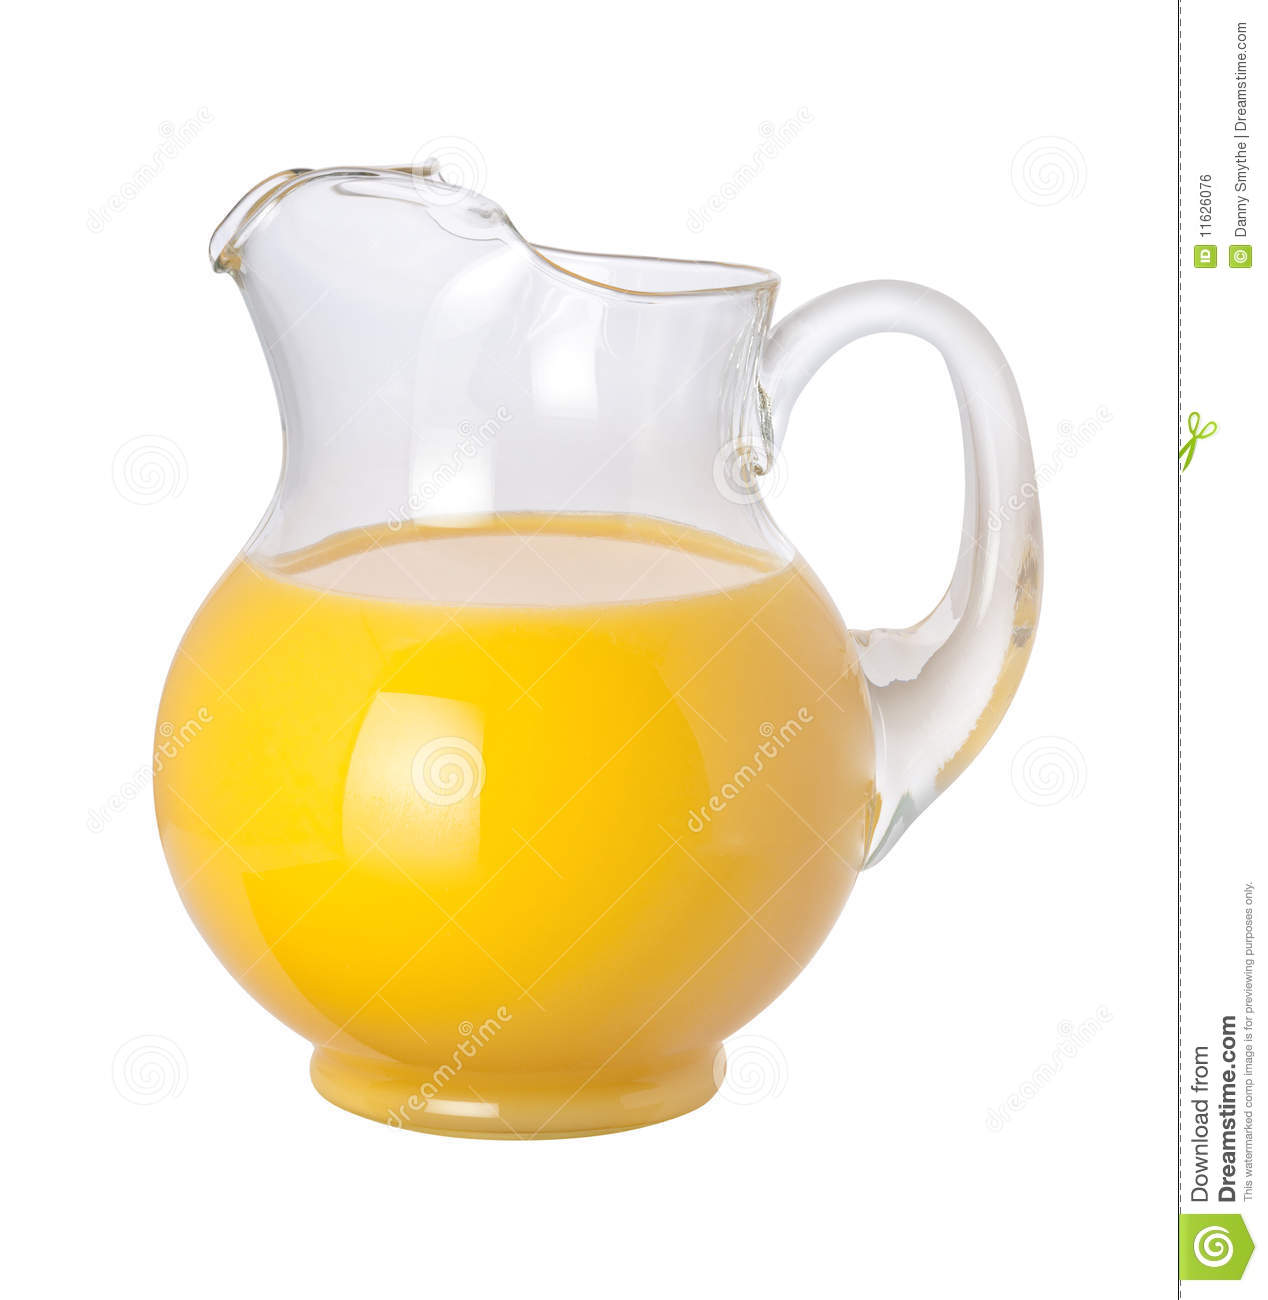 Orange Juice Pitcher With A Clipping Path Isolated On White Isolation